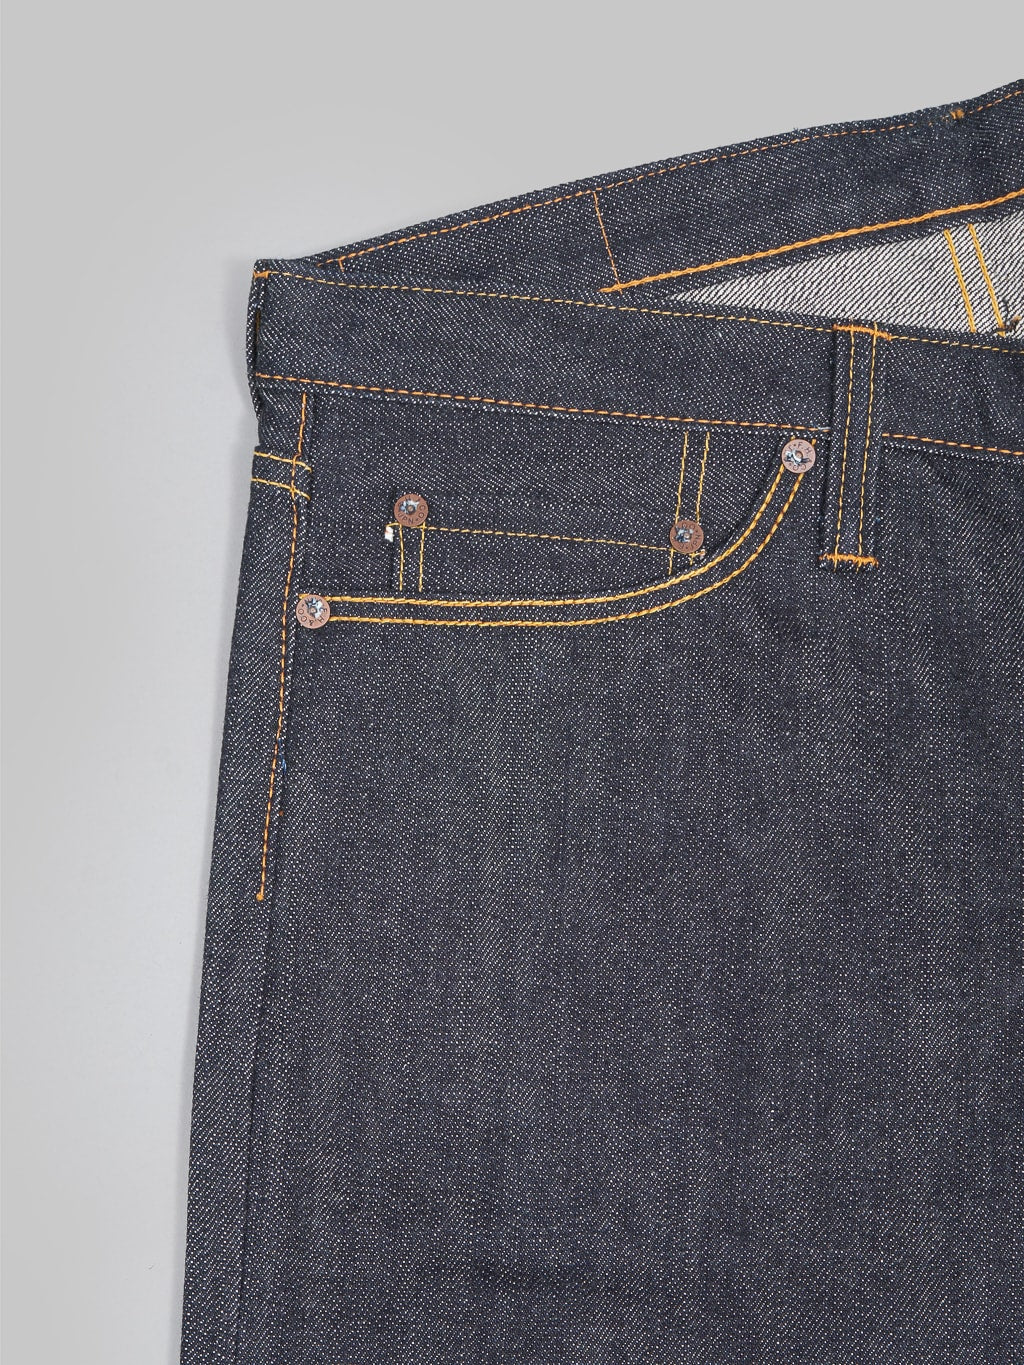 The Flat Head D306 Tight Tapered Jeans coin pocket